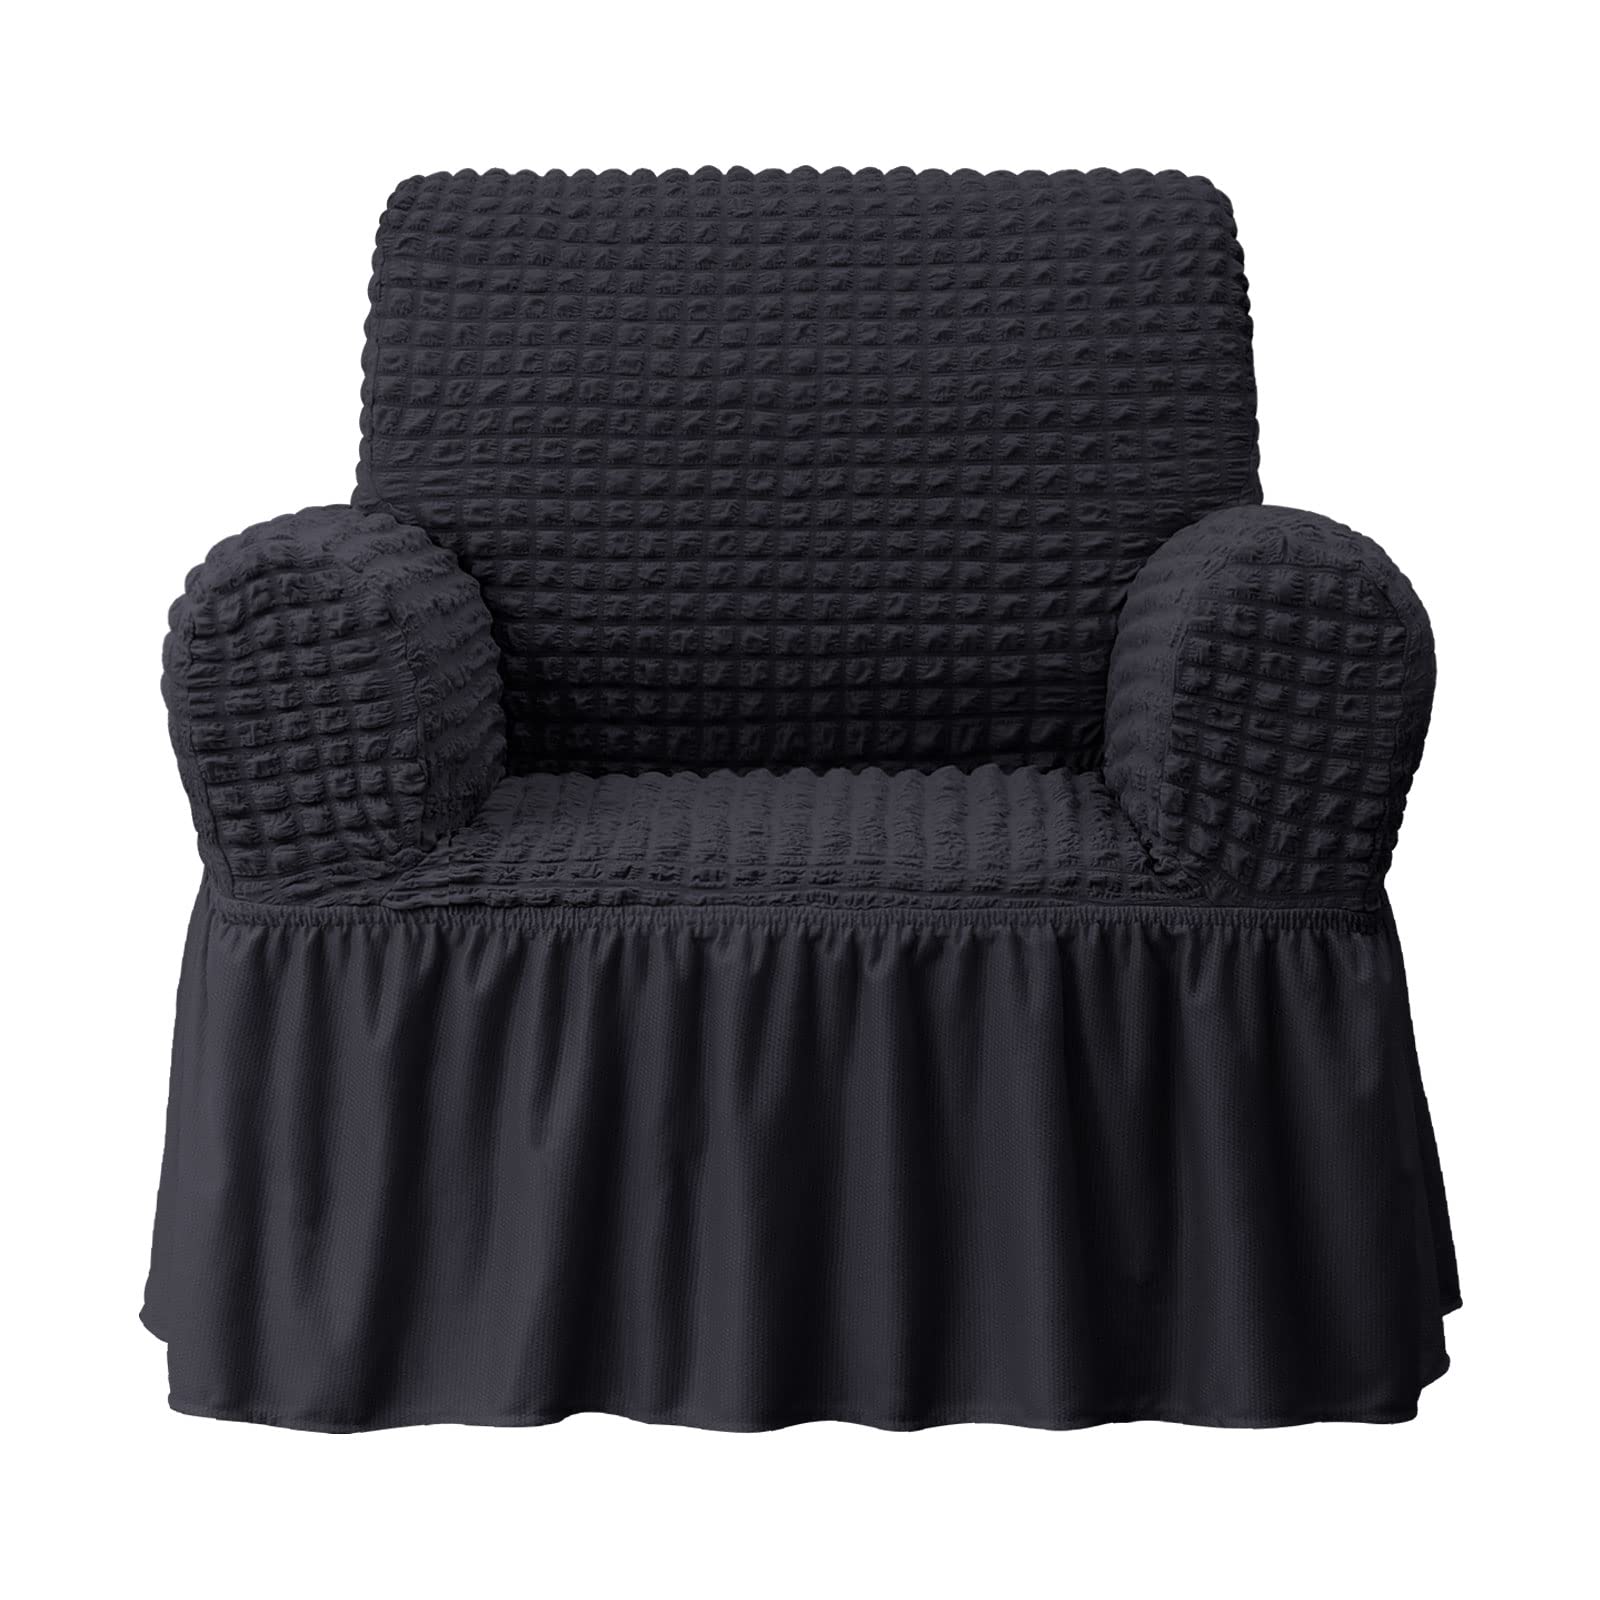 NICEEC Armchair Slipcover Black Armchair Covers 1 Piece Easy Fitted Sofa Couch Cover Universal High Stretchable Durable Furnitur